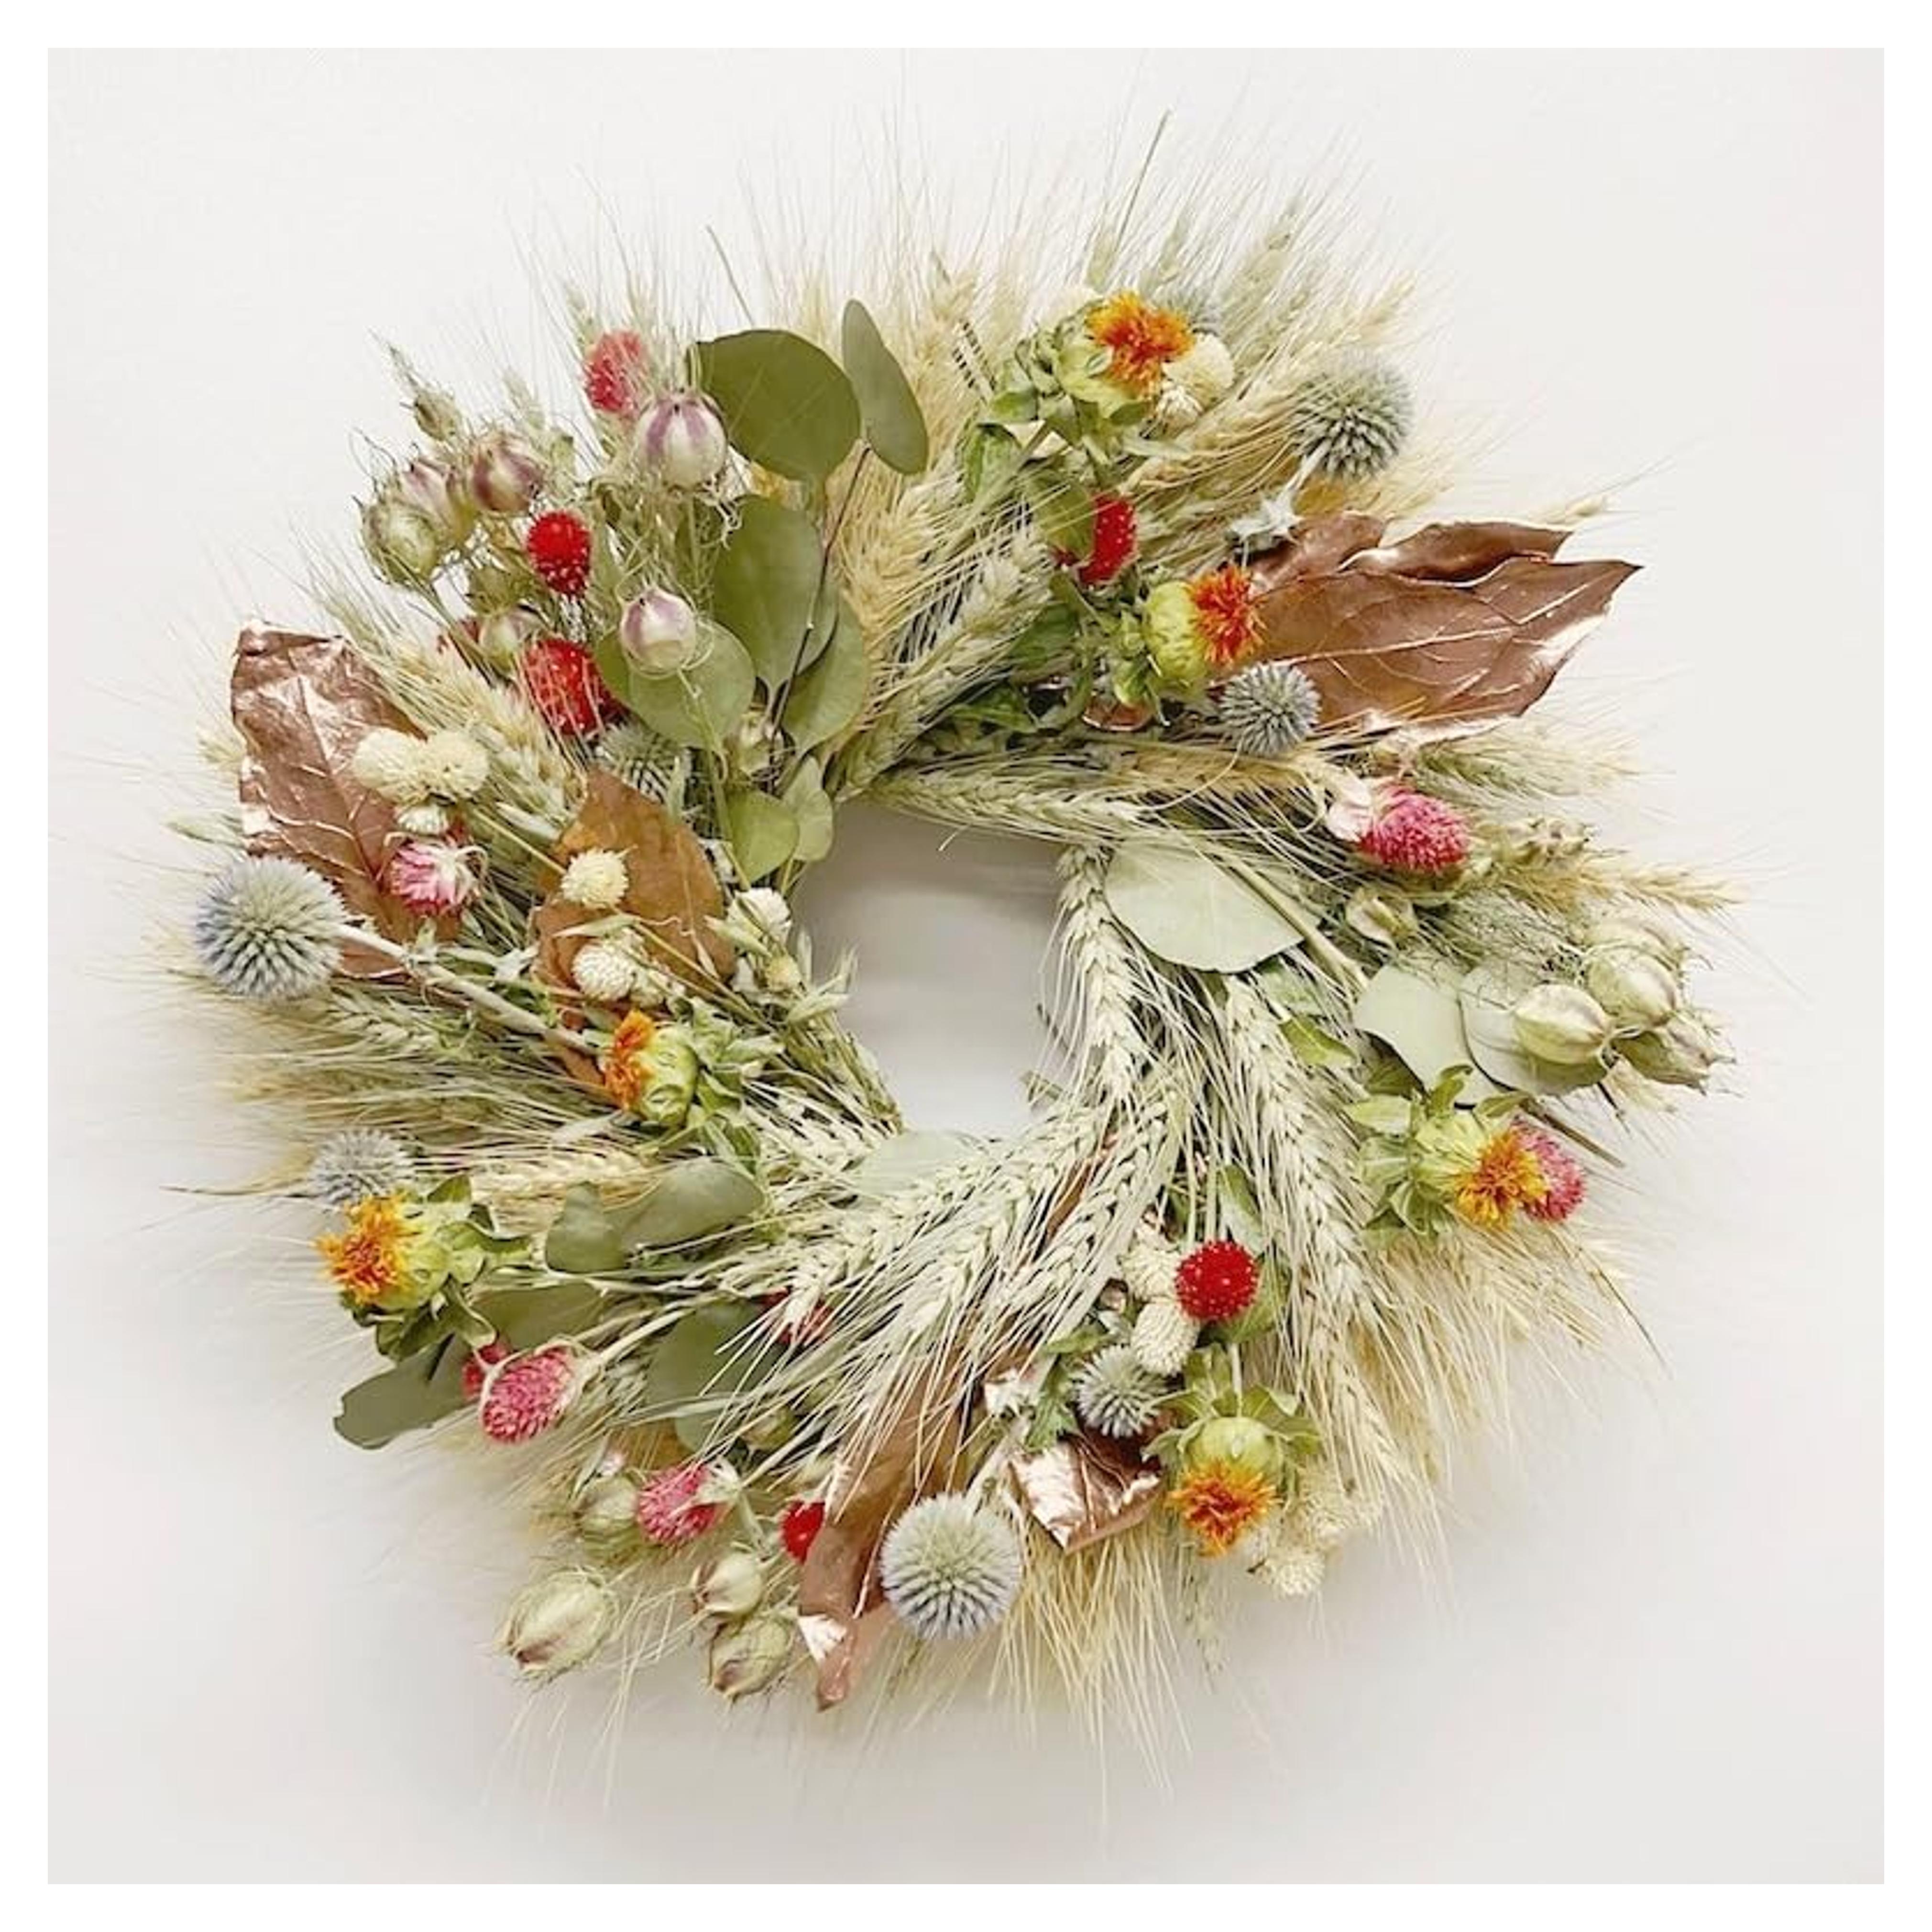 Amazon.com: Magical Garland That Blooms on a Mysterious nightVanCortlandt Farms Natural Handmade Wheat and Dried Flower Copper Autumn Wreath (22 inches) : Home & Kitchen